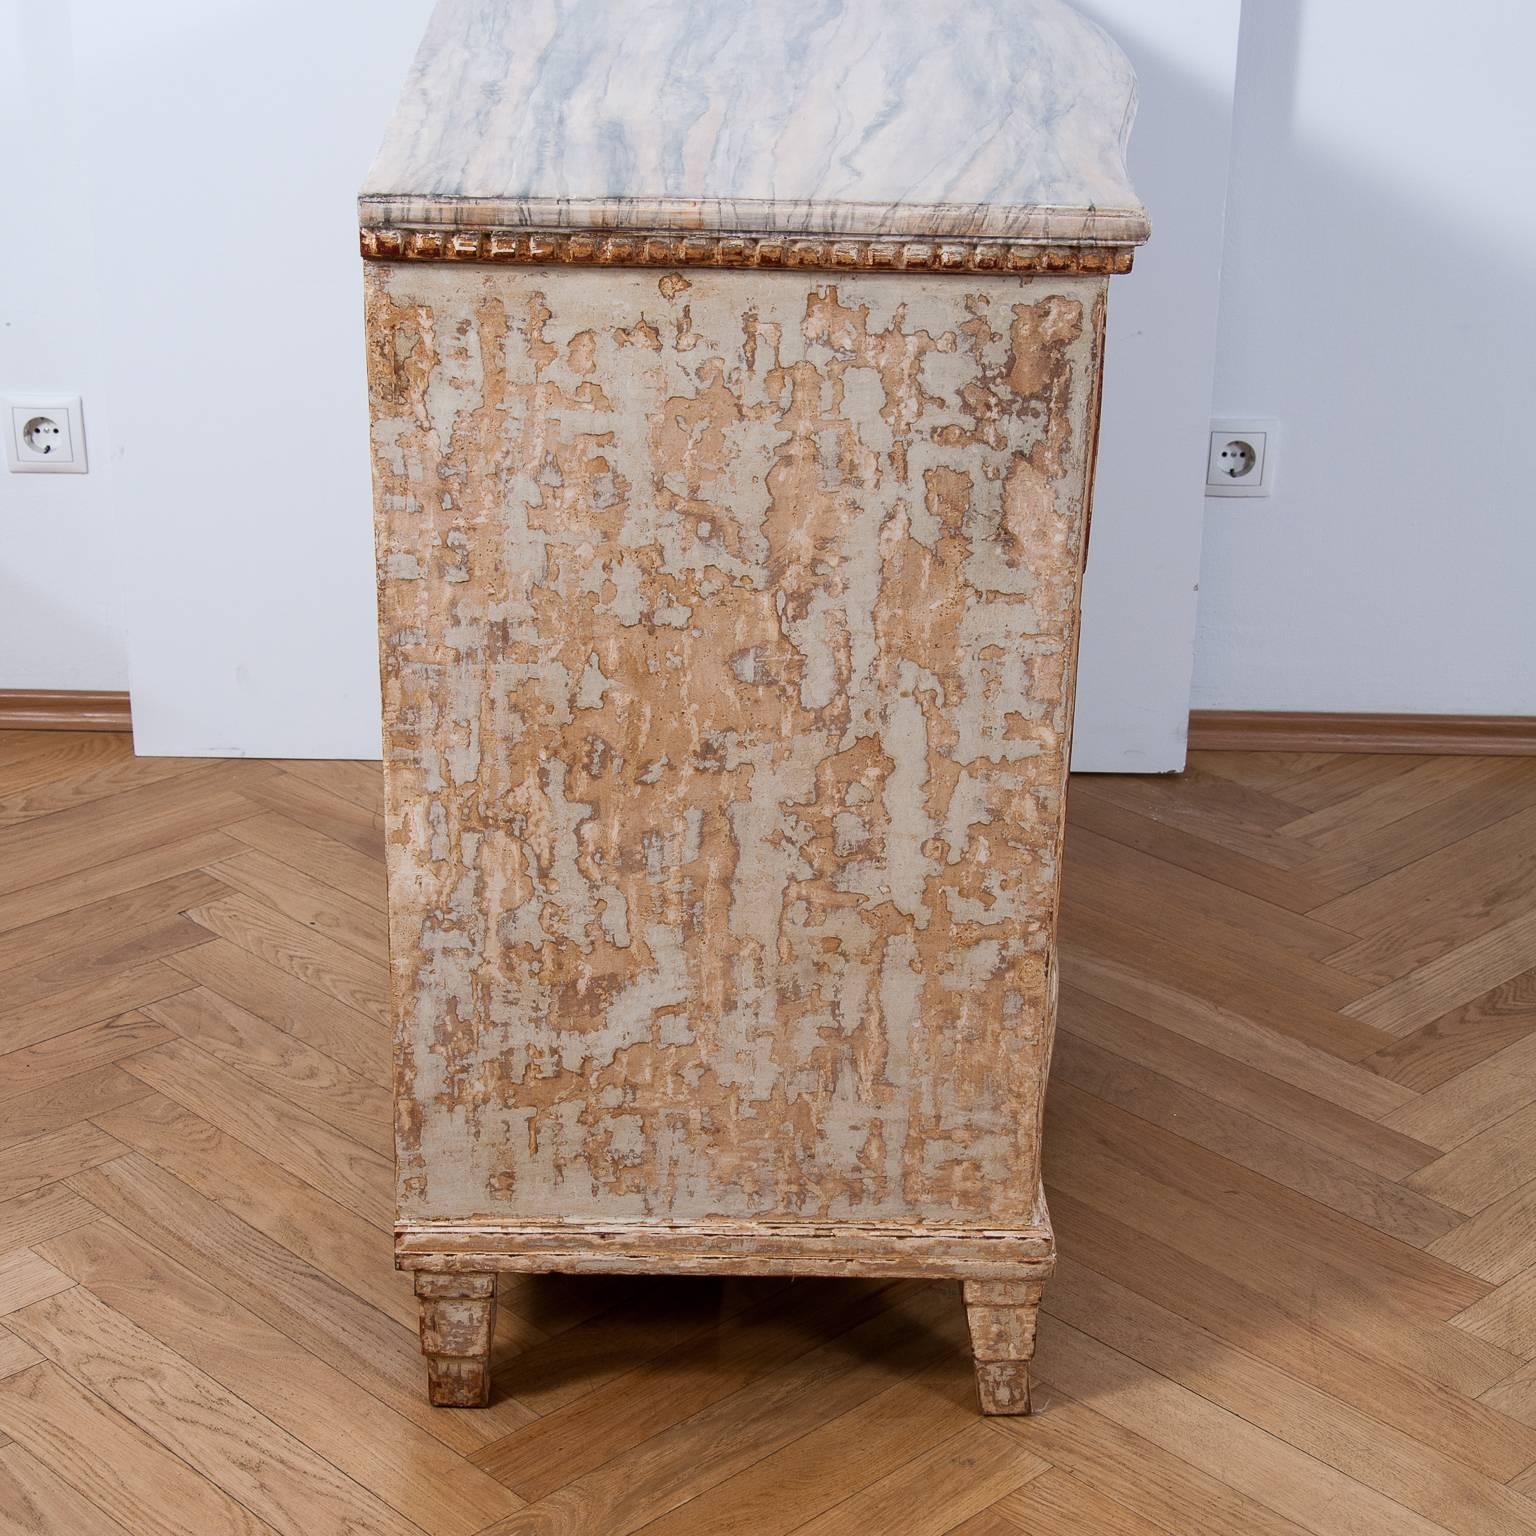 An exceptional, 18th century German Louis XVI chest of drawers with beautifully carved serpentine front and sides with new painted red, white and golden design, the commode has three drawers and has been fully restored and a finish in the Gustavian